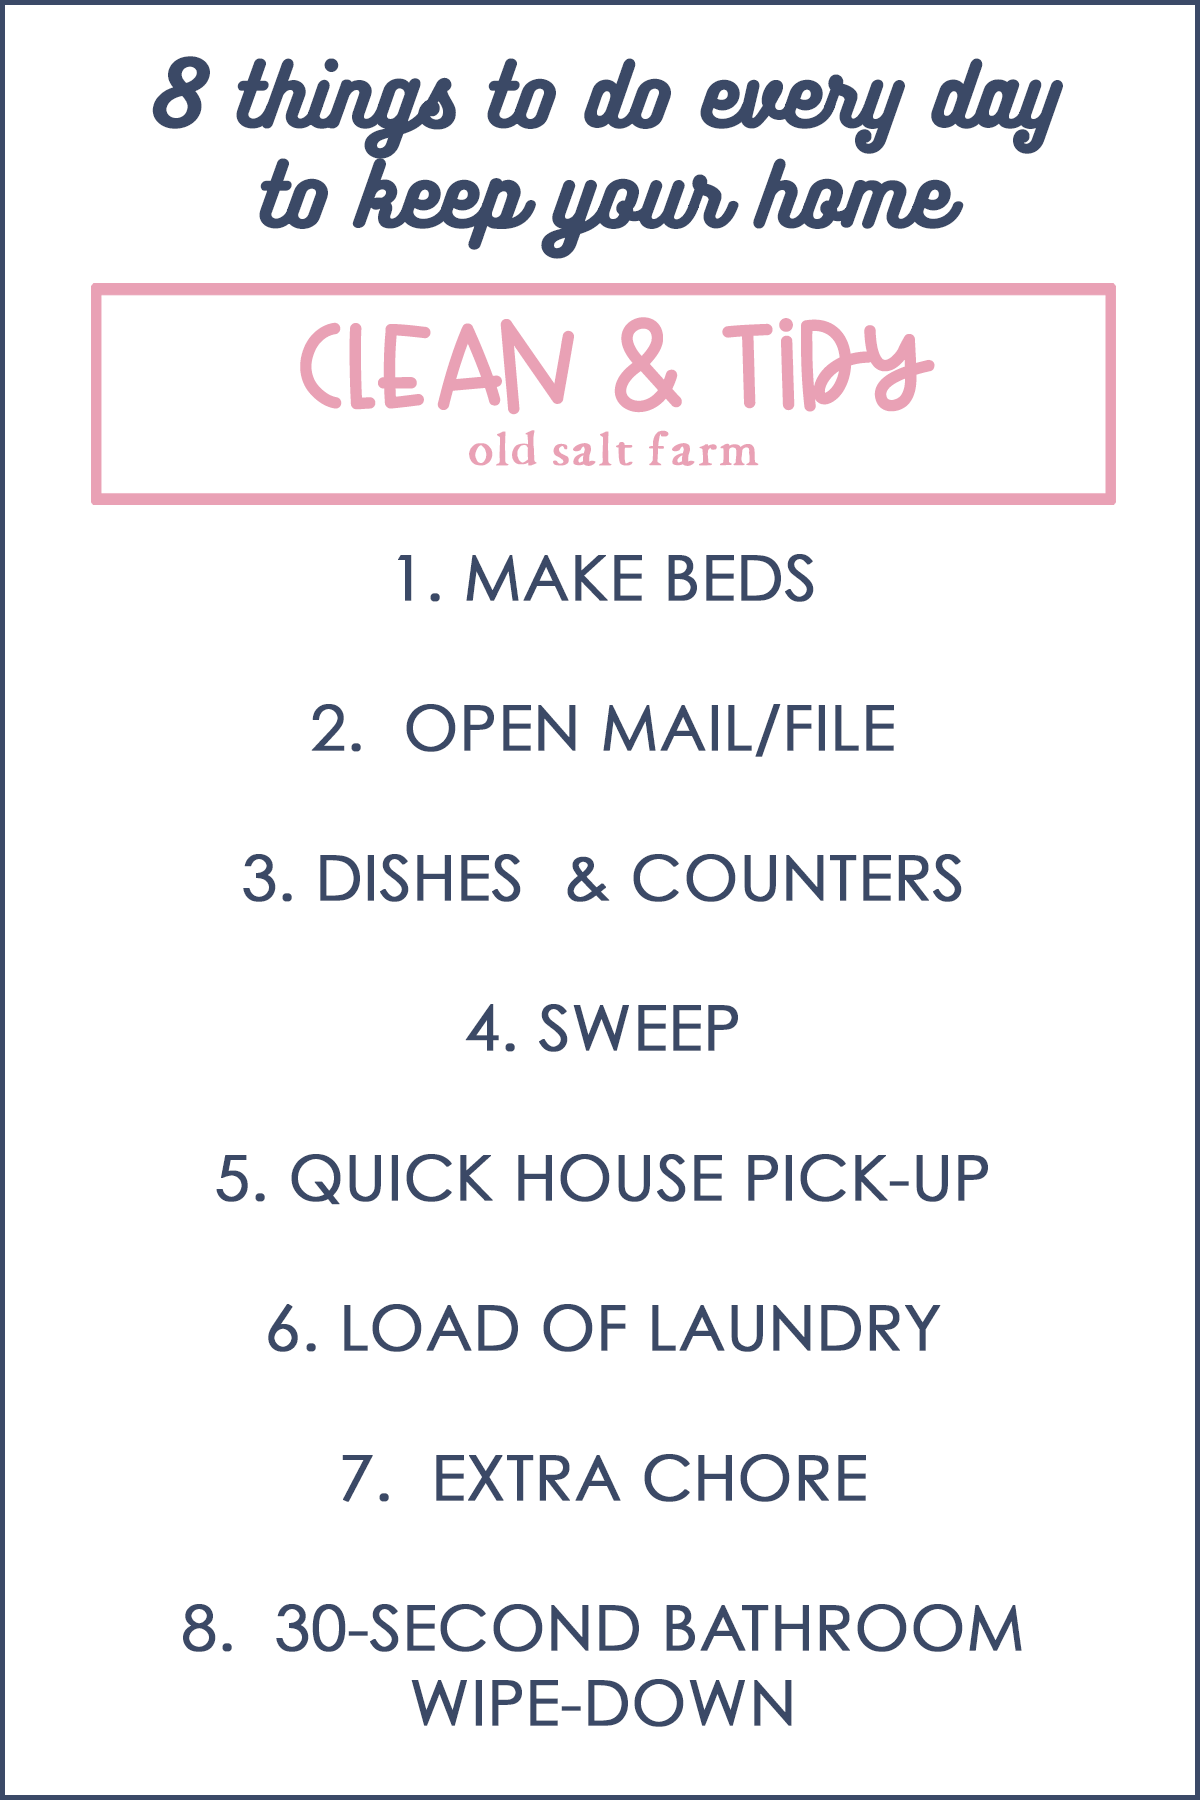 8 things I do every day: How to keep YOur house clean & Tidy